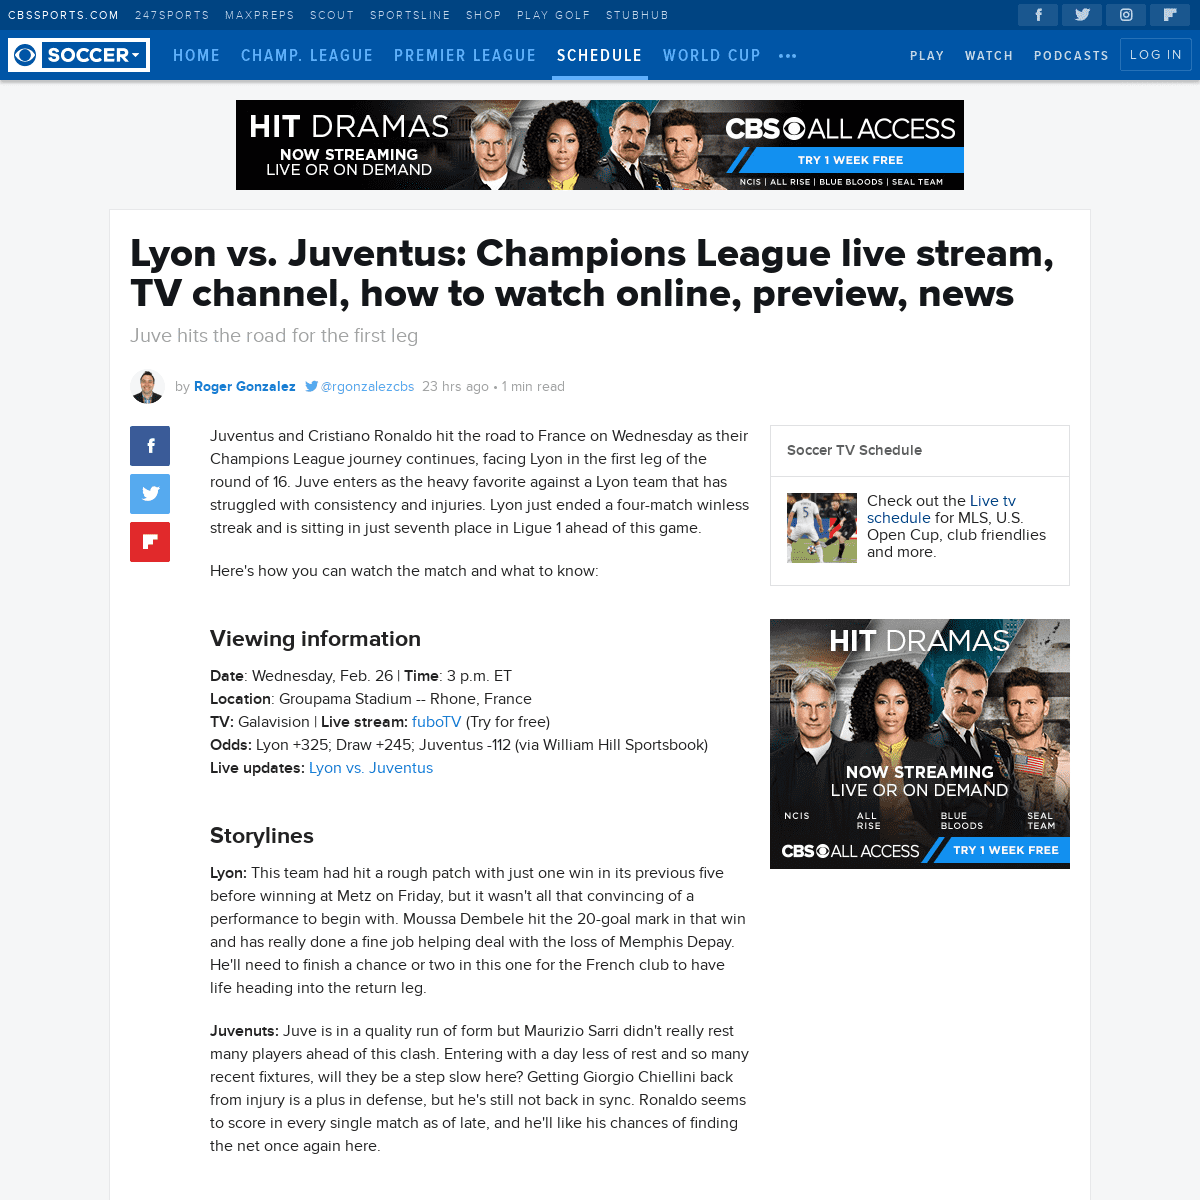 A complete backup of www.cbssports.com/soccer/news/lyon-vs-juventus-champions-league-preview-live-stream-how-to-watch-online-tv-